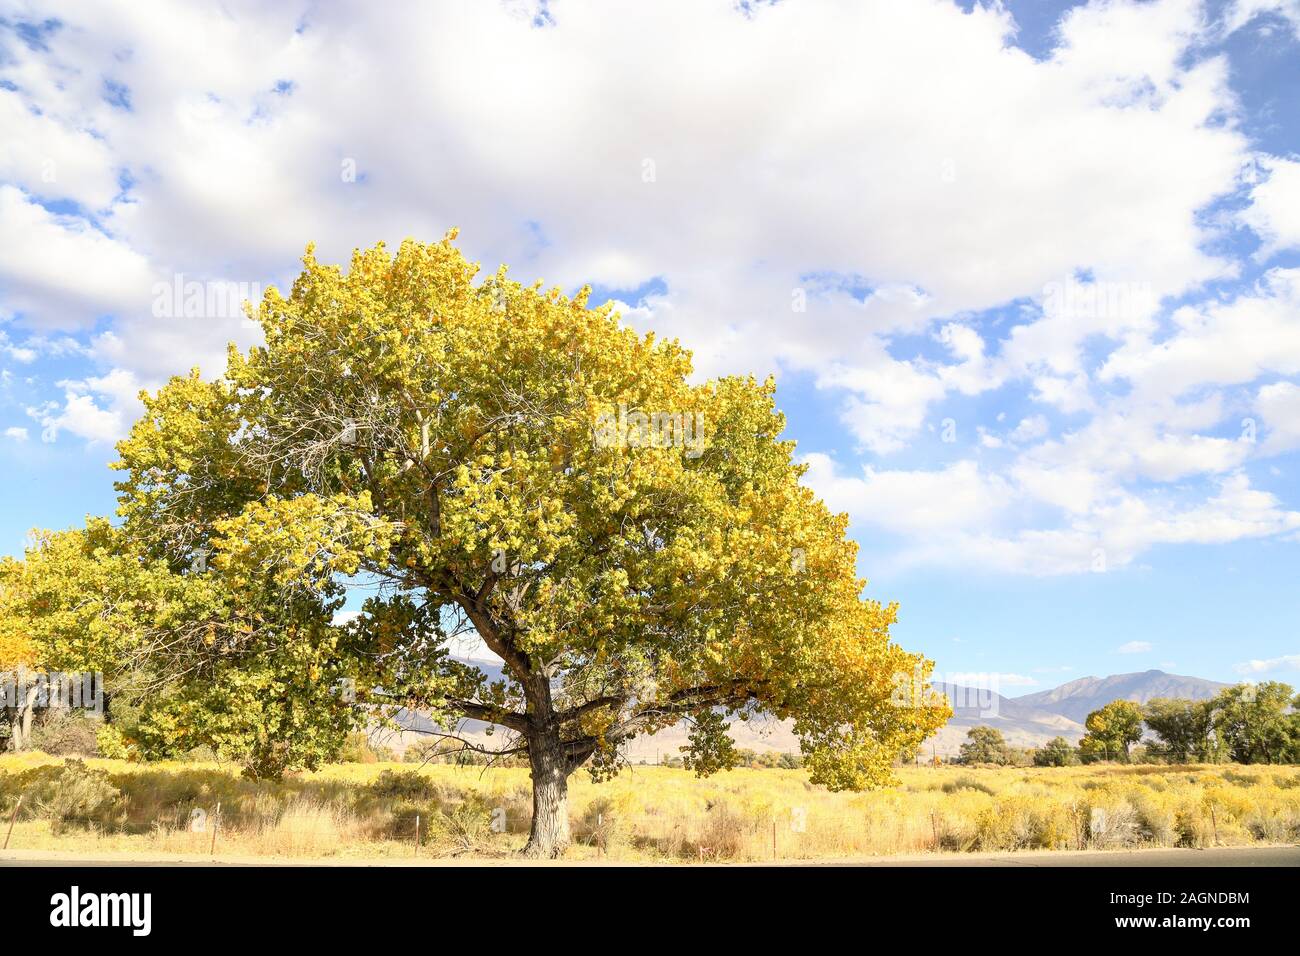 A large tree showing fall colors along the roadside in Bishop, California on a peaceful day. Stock Photo